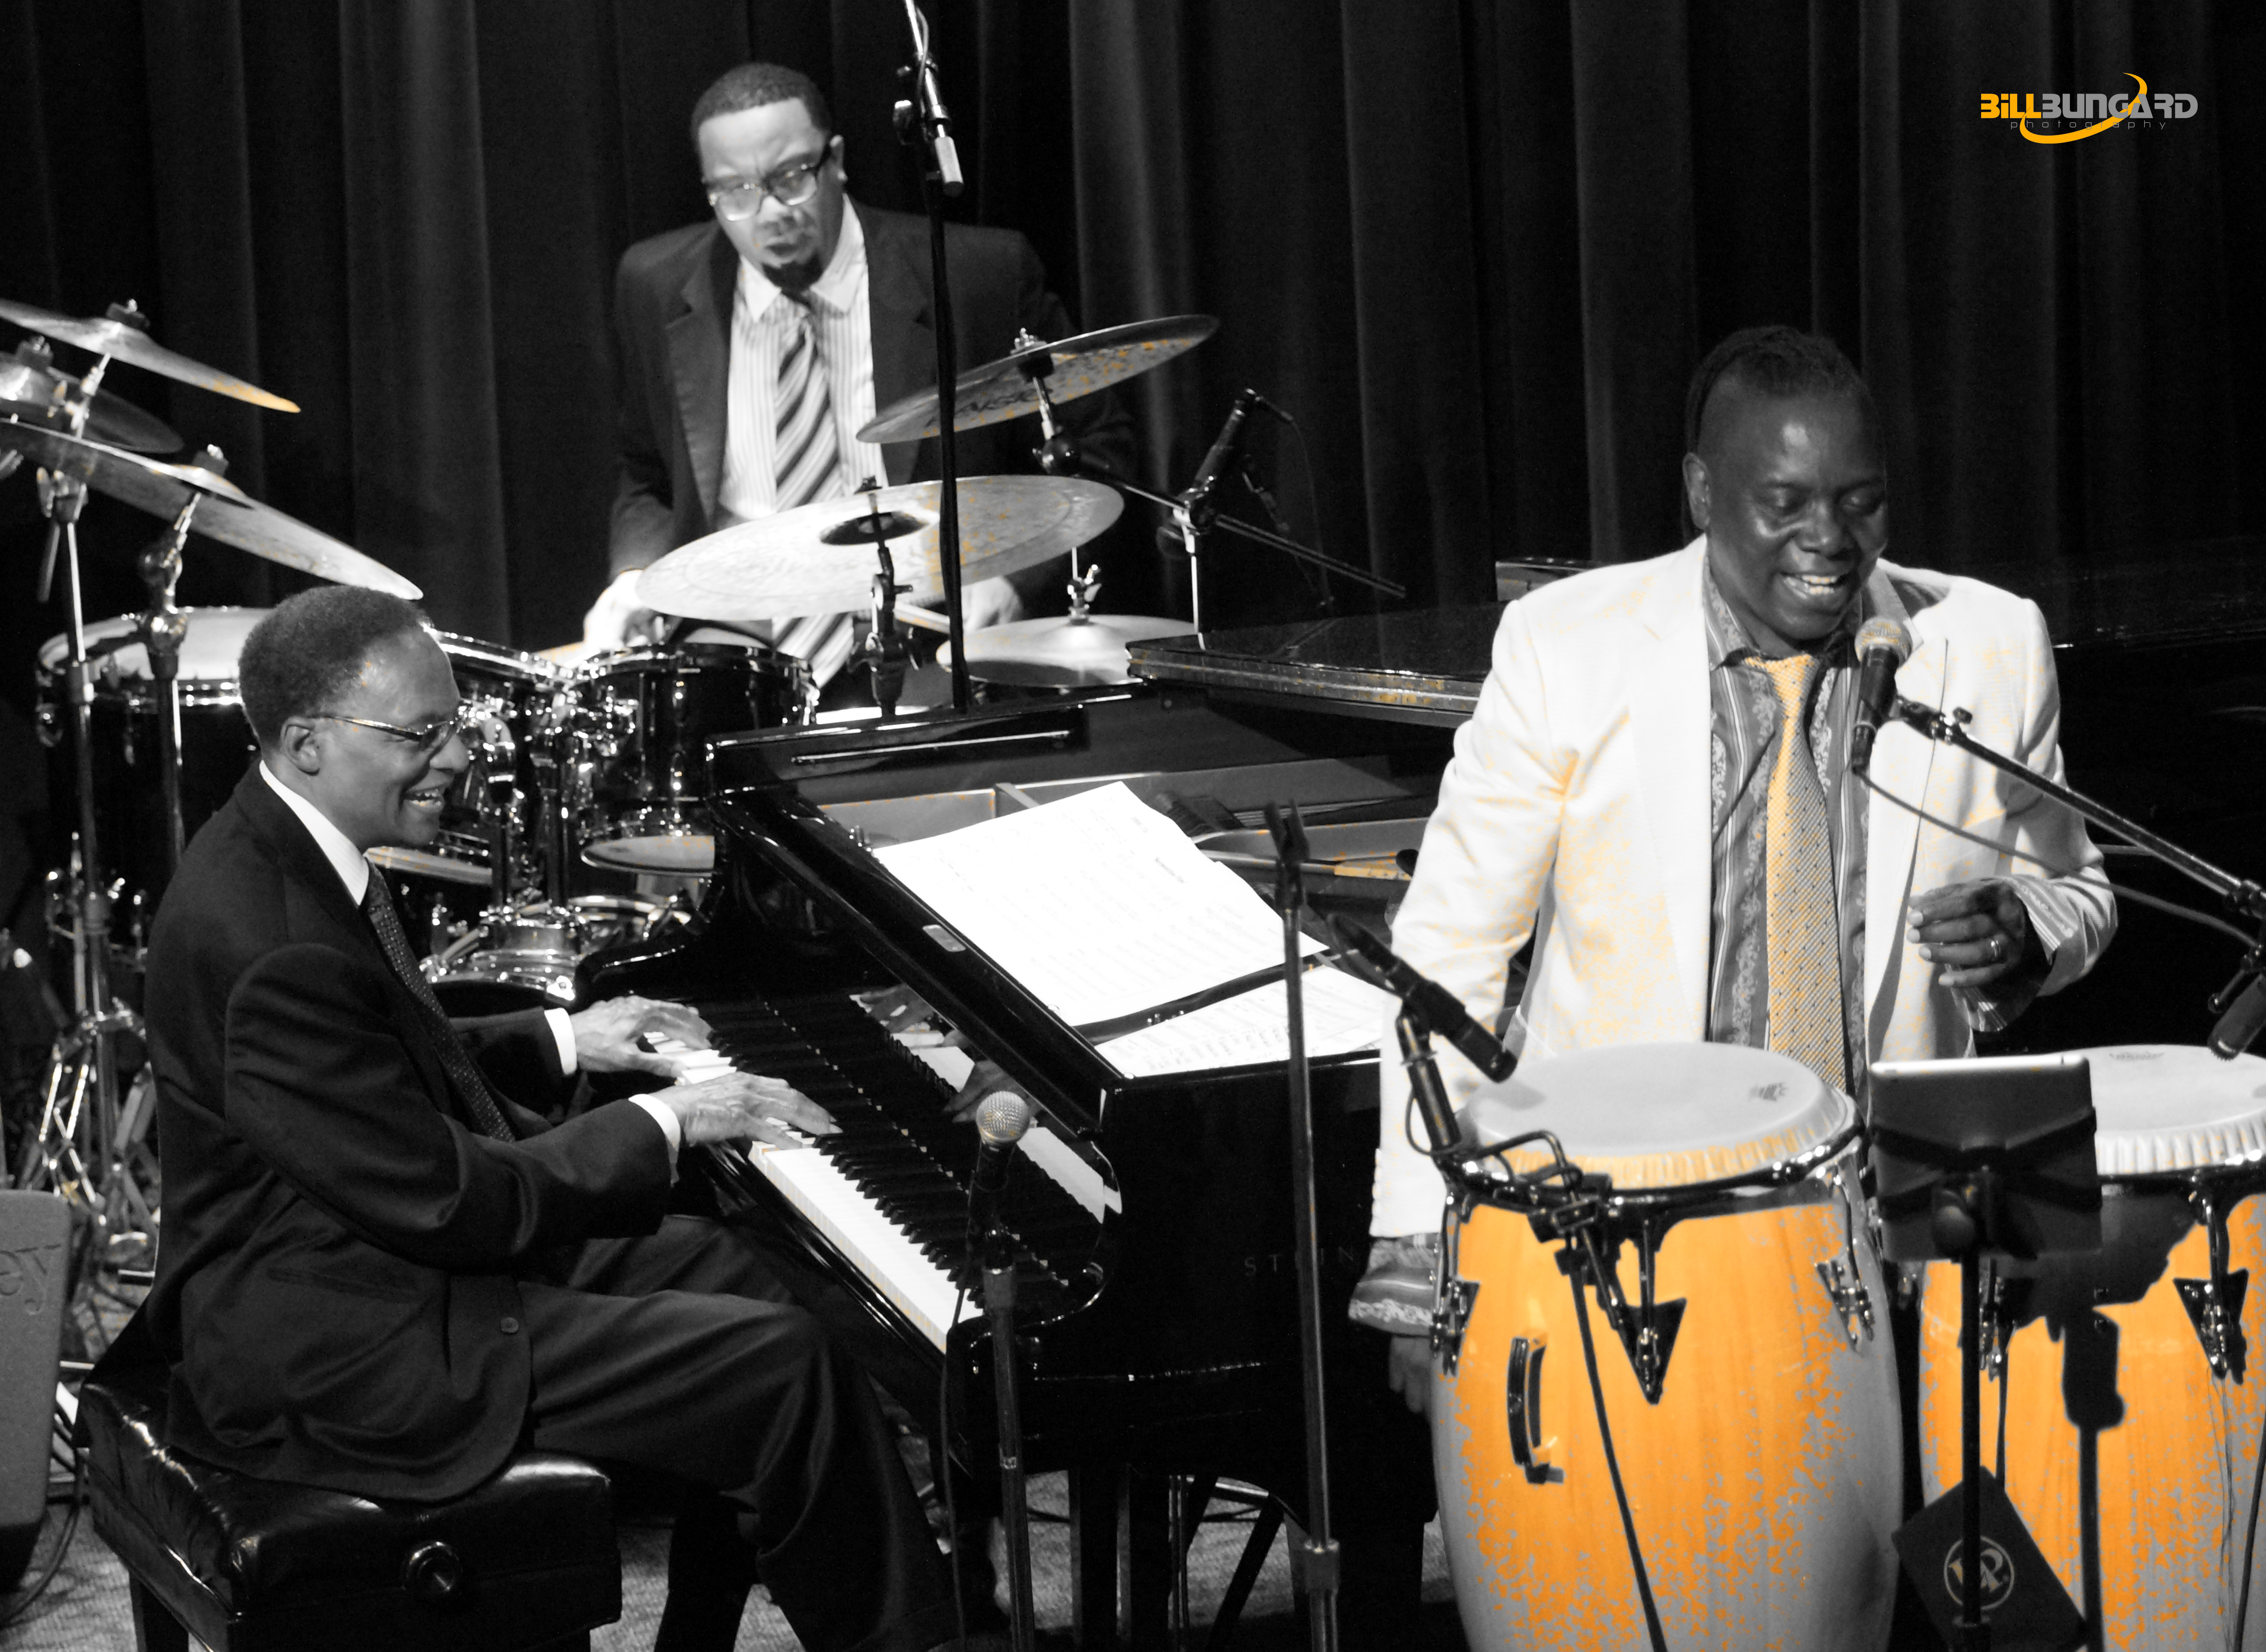 Ramsey Lewis and Philip Bailey at Jazz Alley (Photo by Bill Bungard)